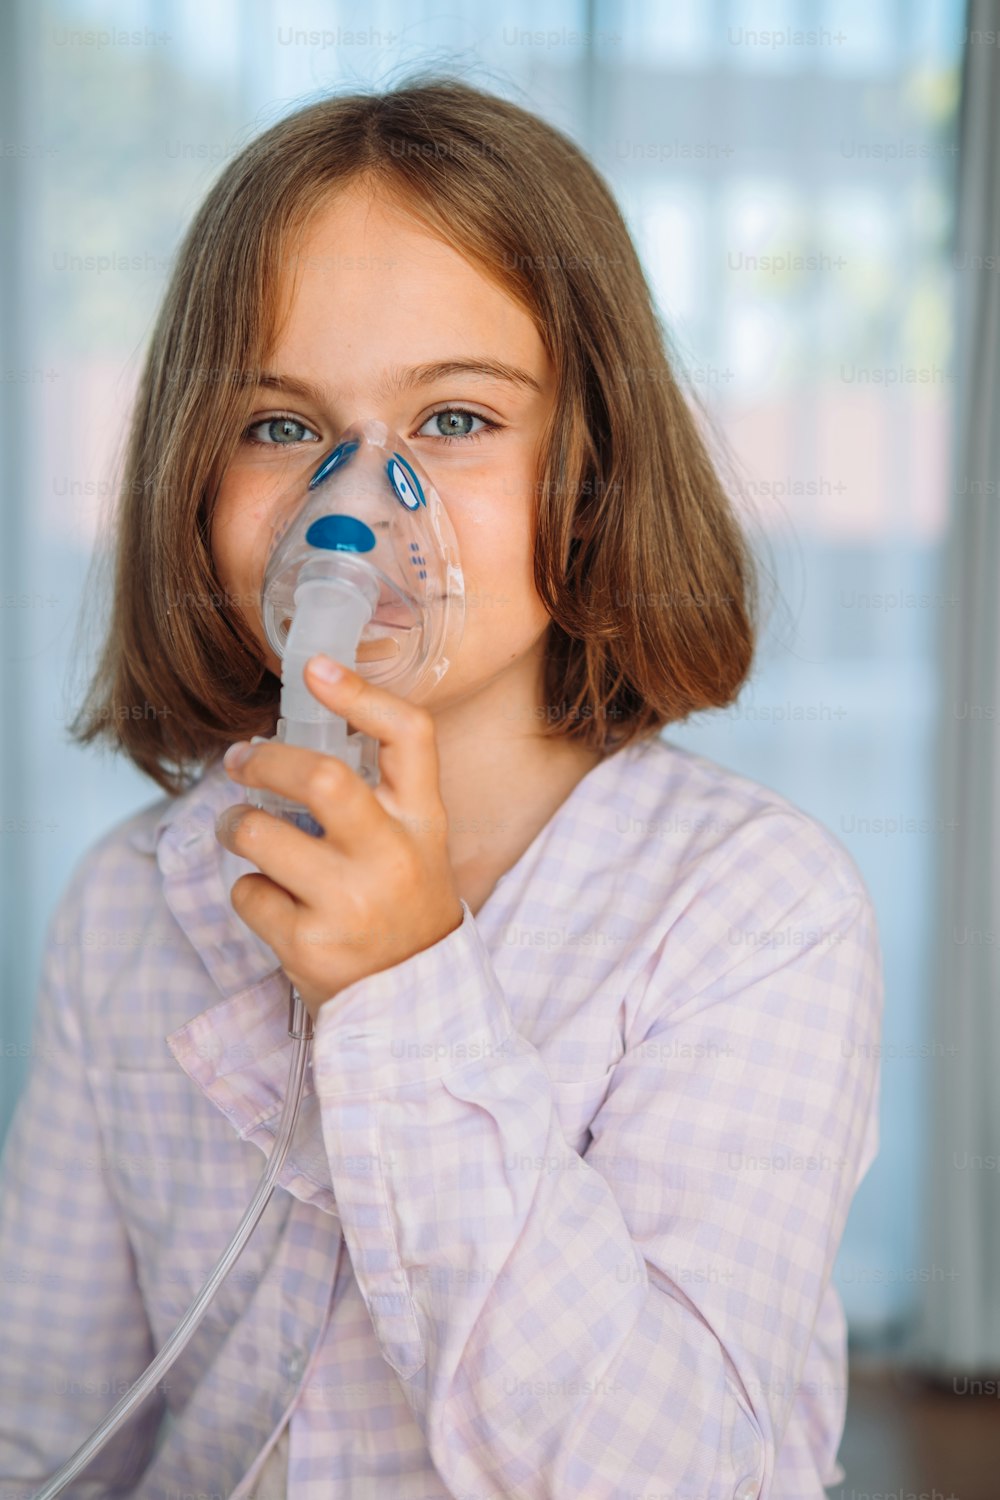 a little girl holding a breathing device in her mouth